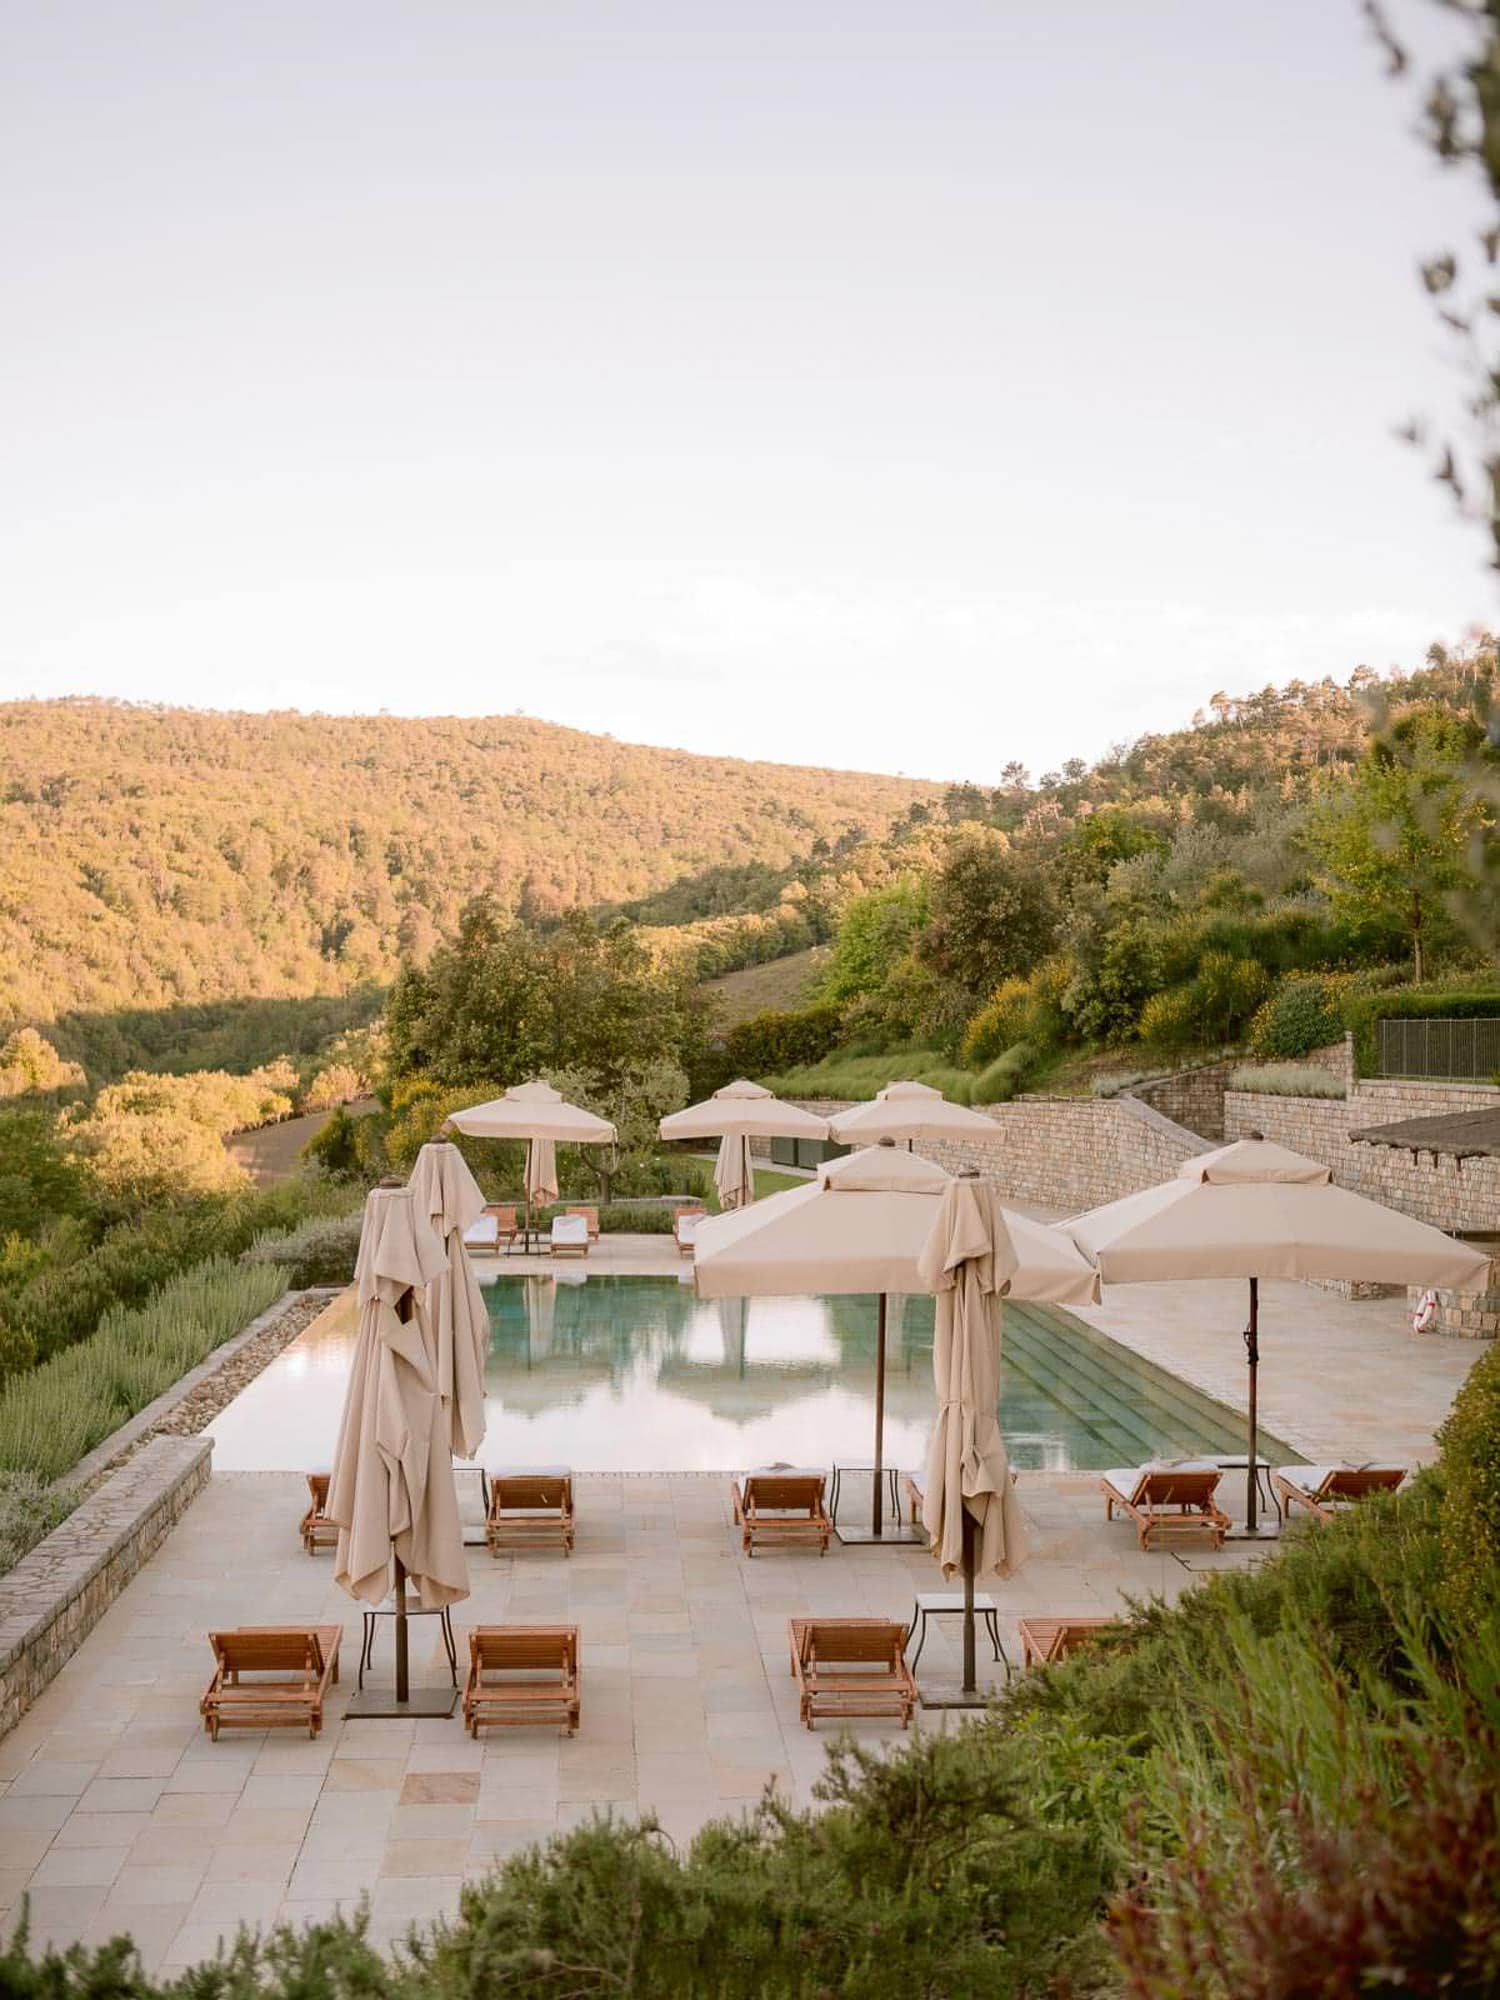 the pool area on the grounds of Rosewood Castiglion del Bosco